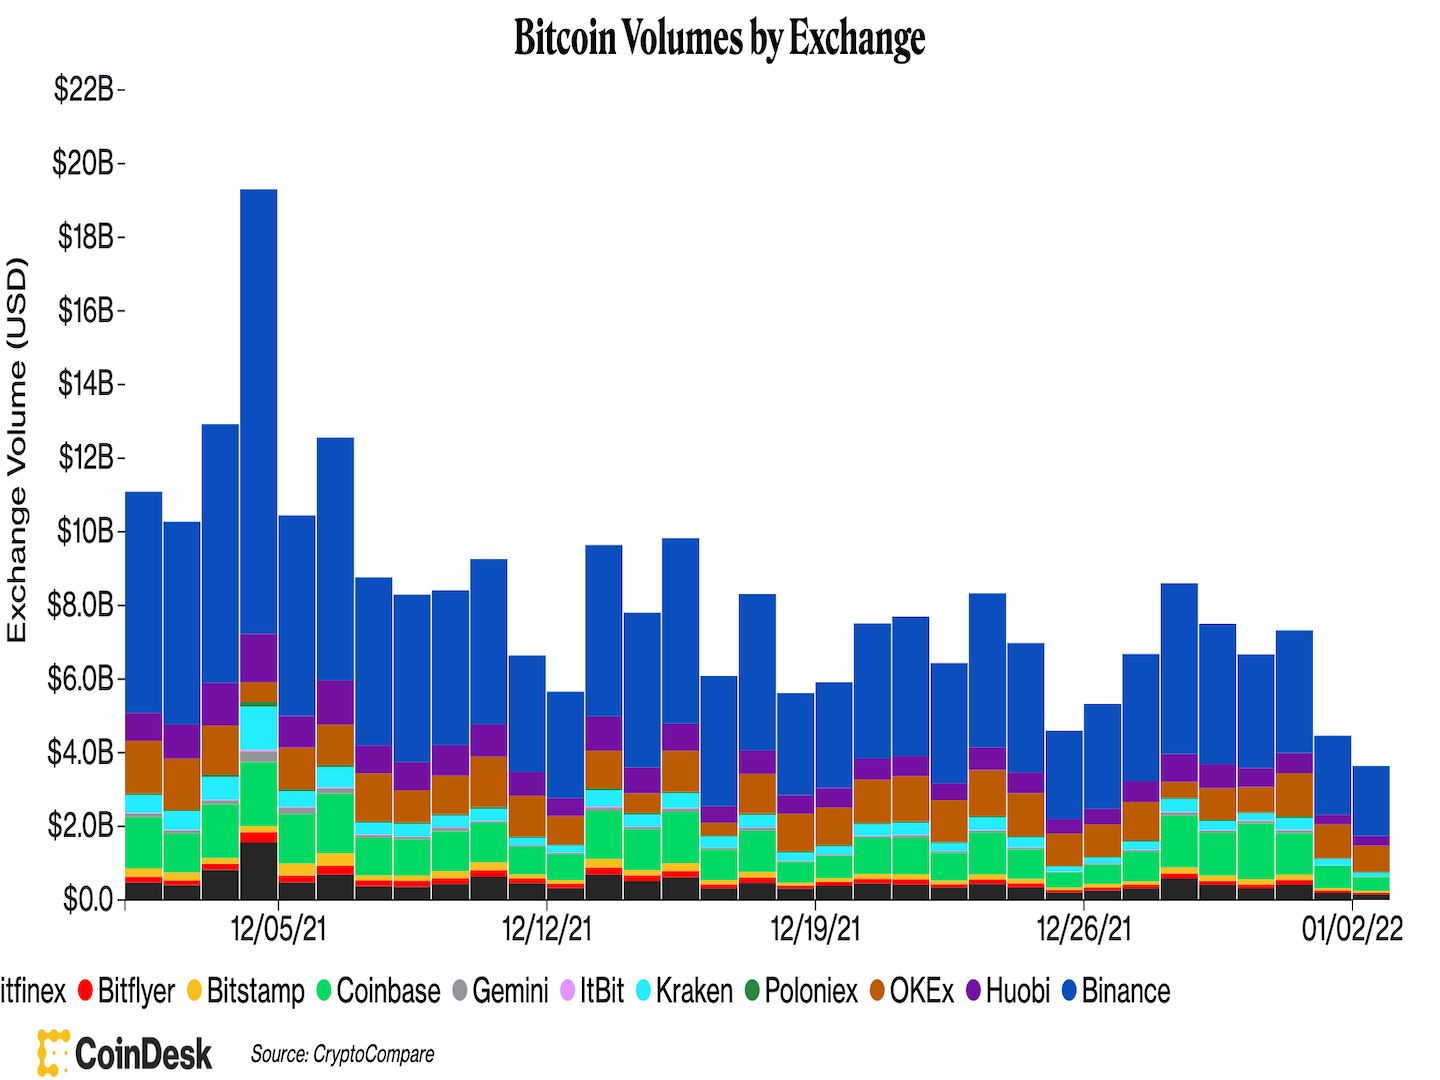 Binance Led in Market Share in as Volume on Centralized Exchanges Fell